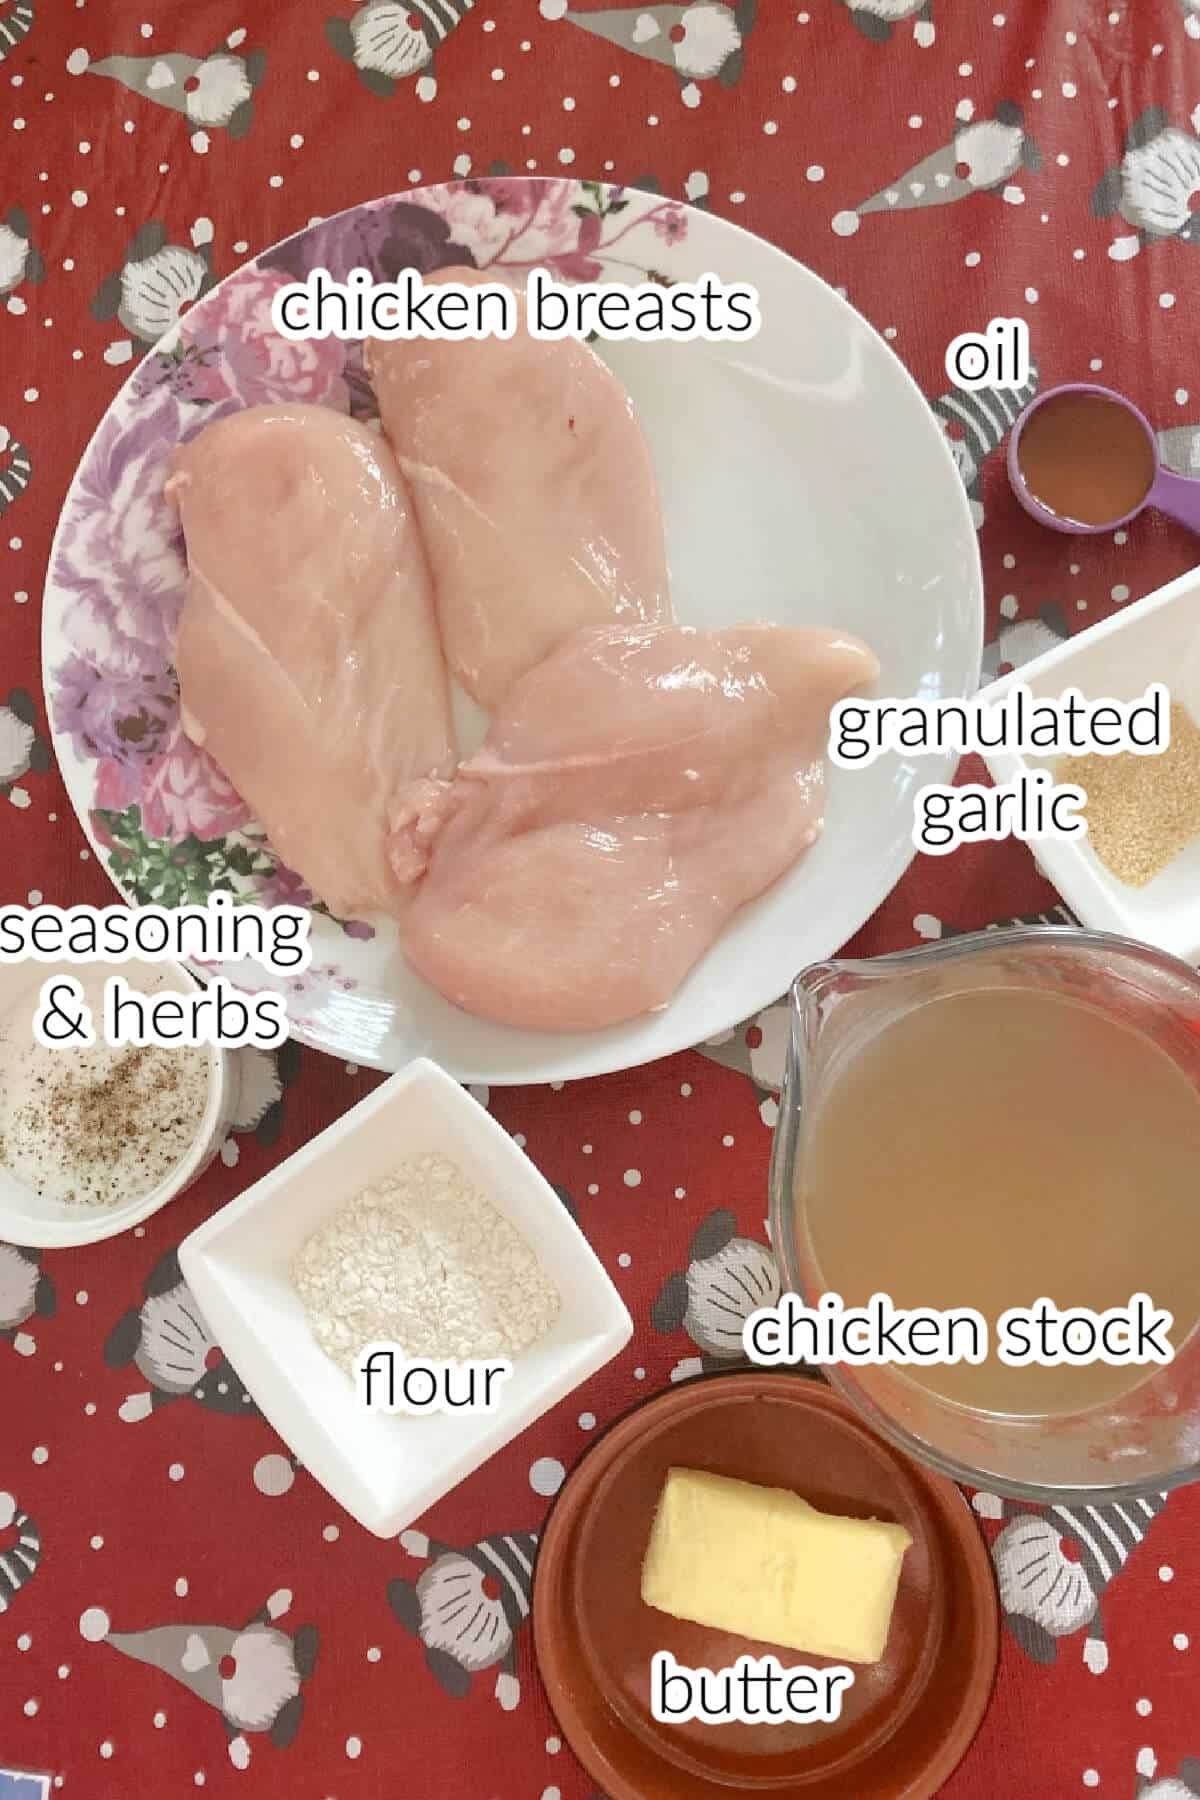 Ingredients needed to cook chicken and gravy.